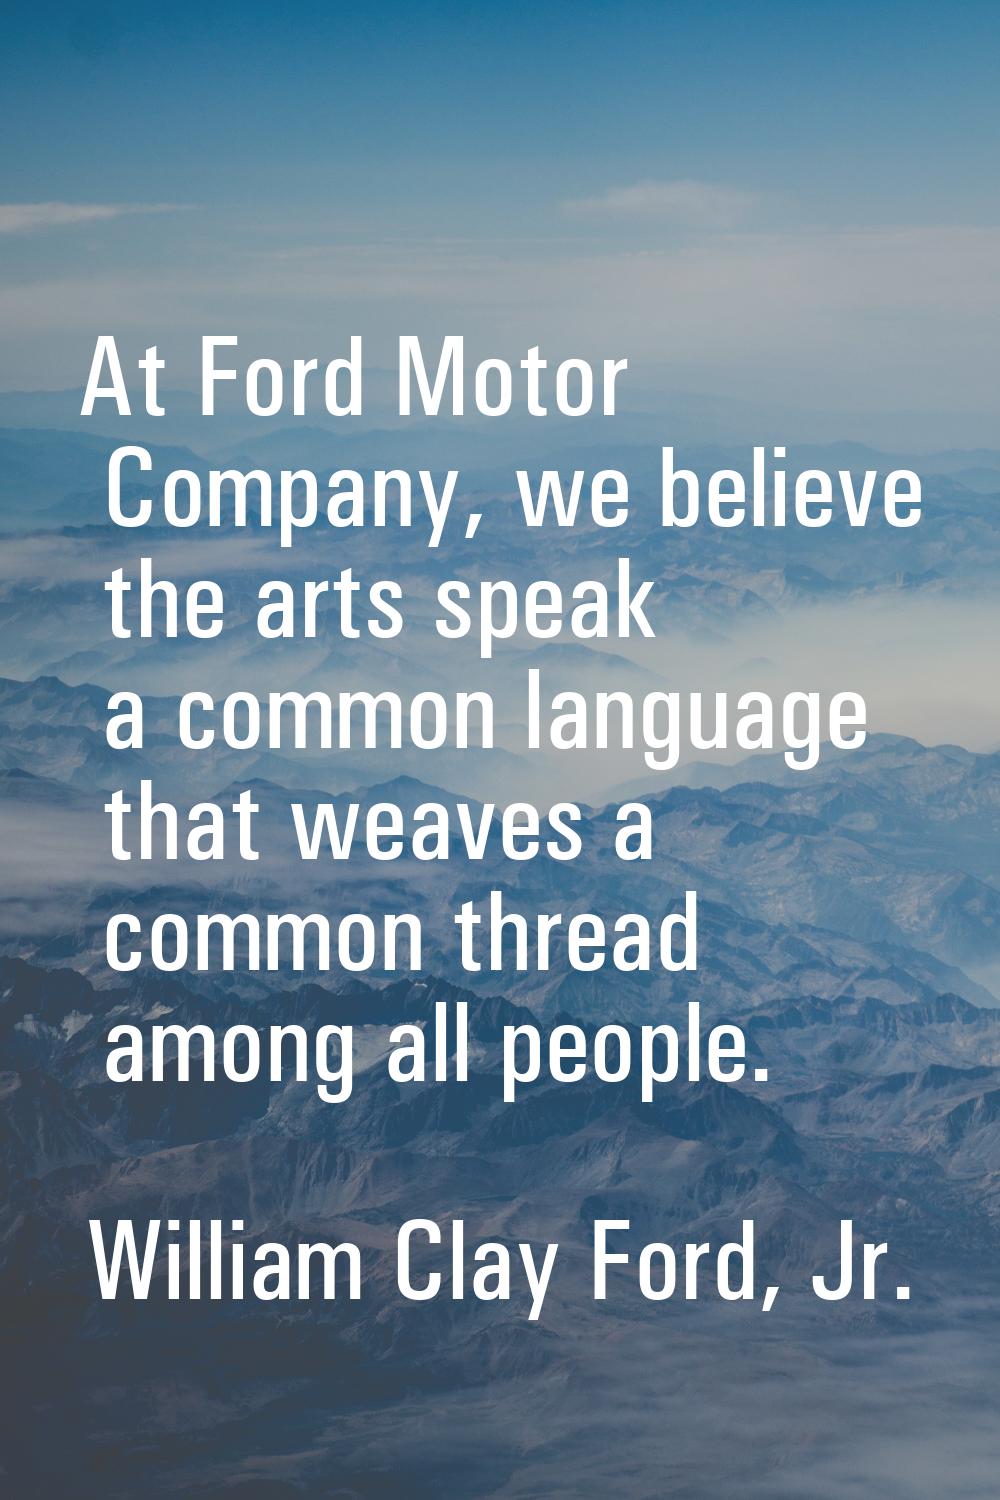 At Ford Motor Company, we believe the arts speak a common language that weaves a common thread amon